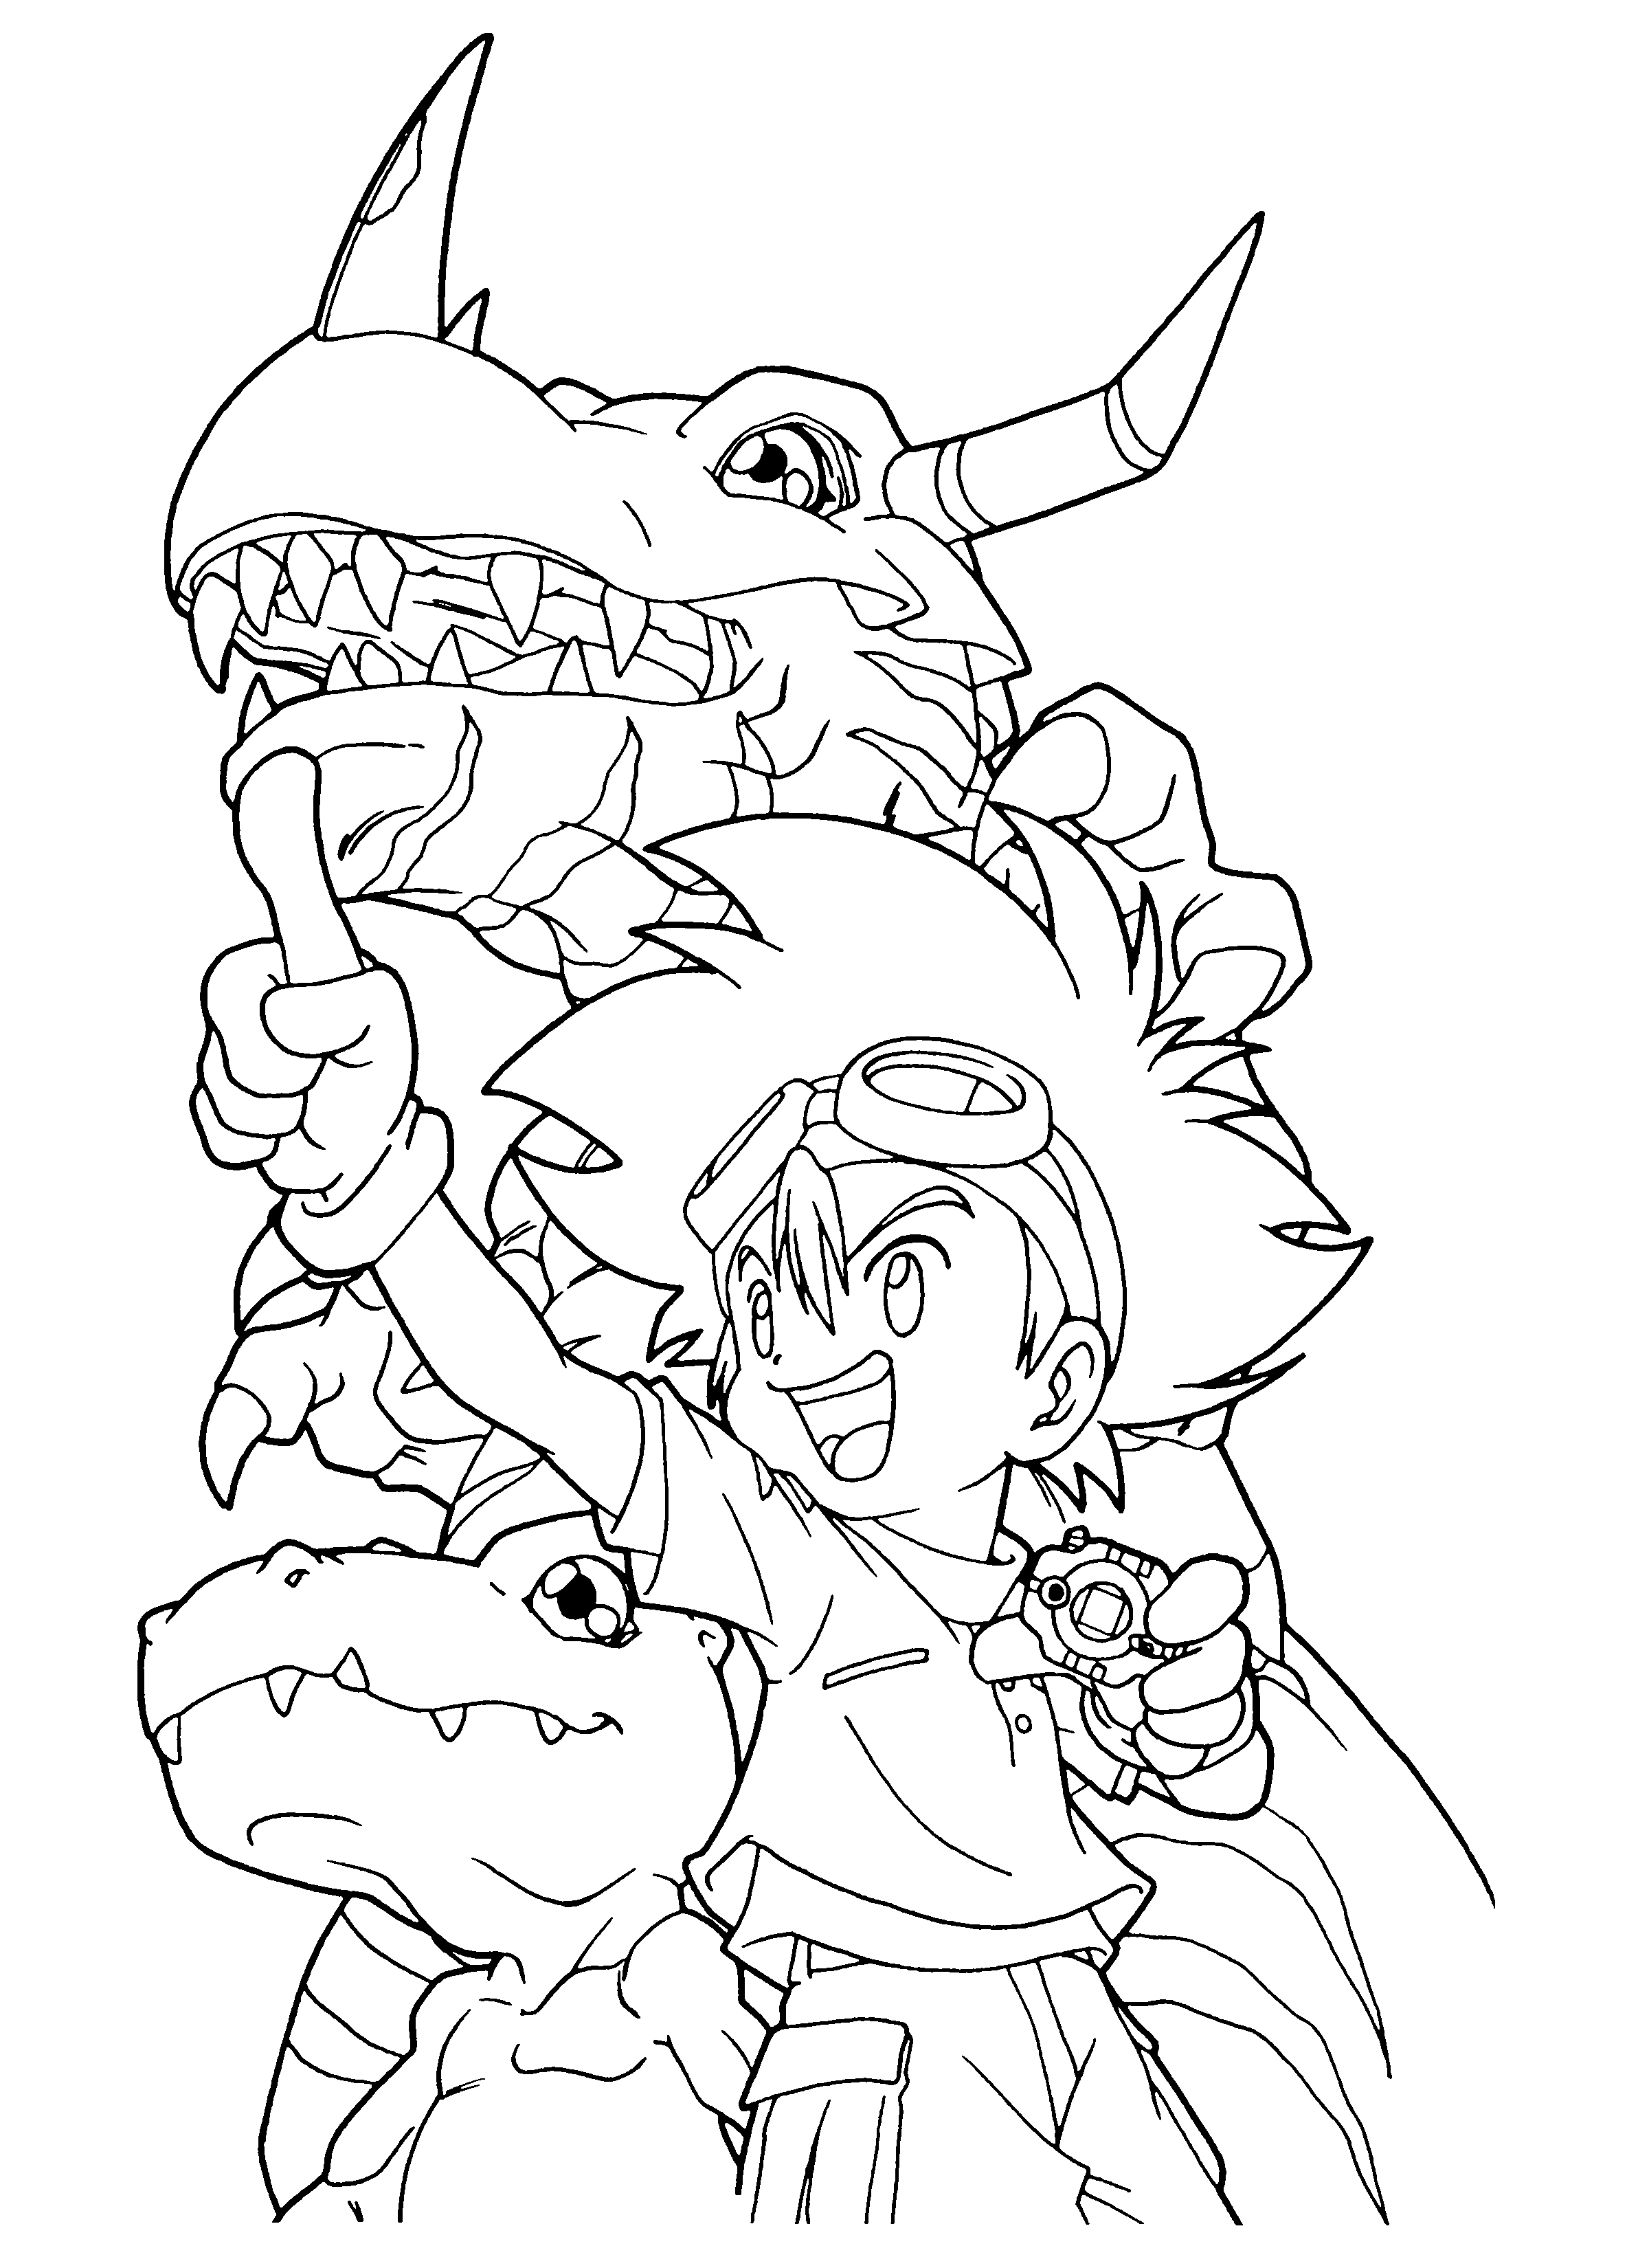 digimon coloring pages to print Coloring4free